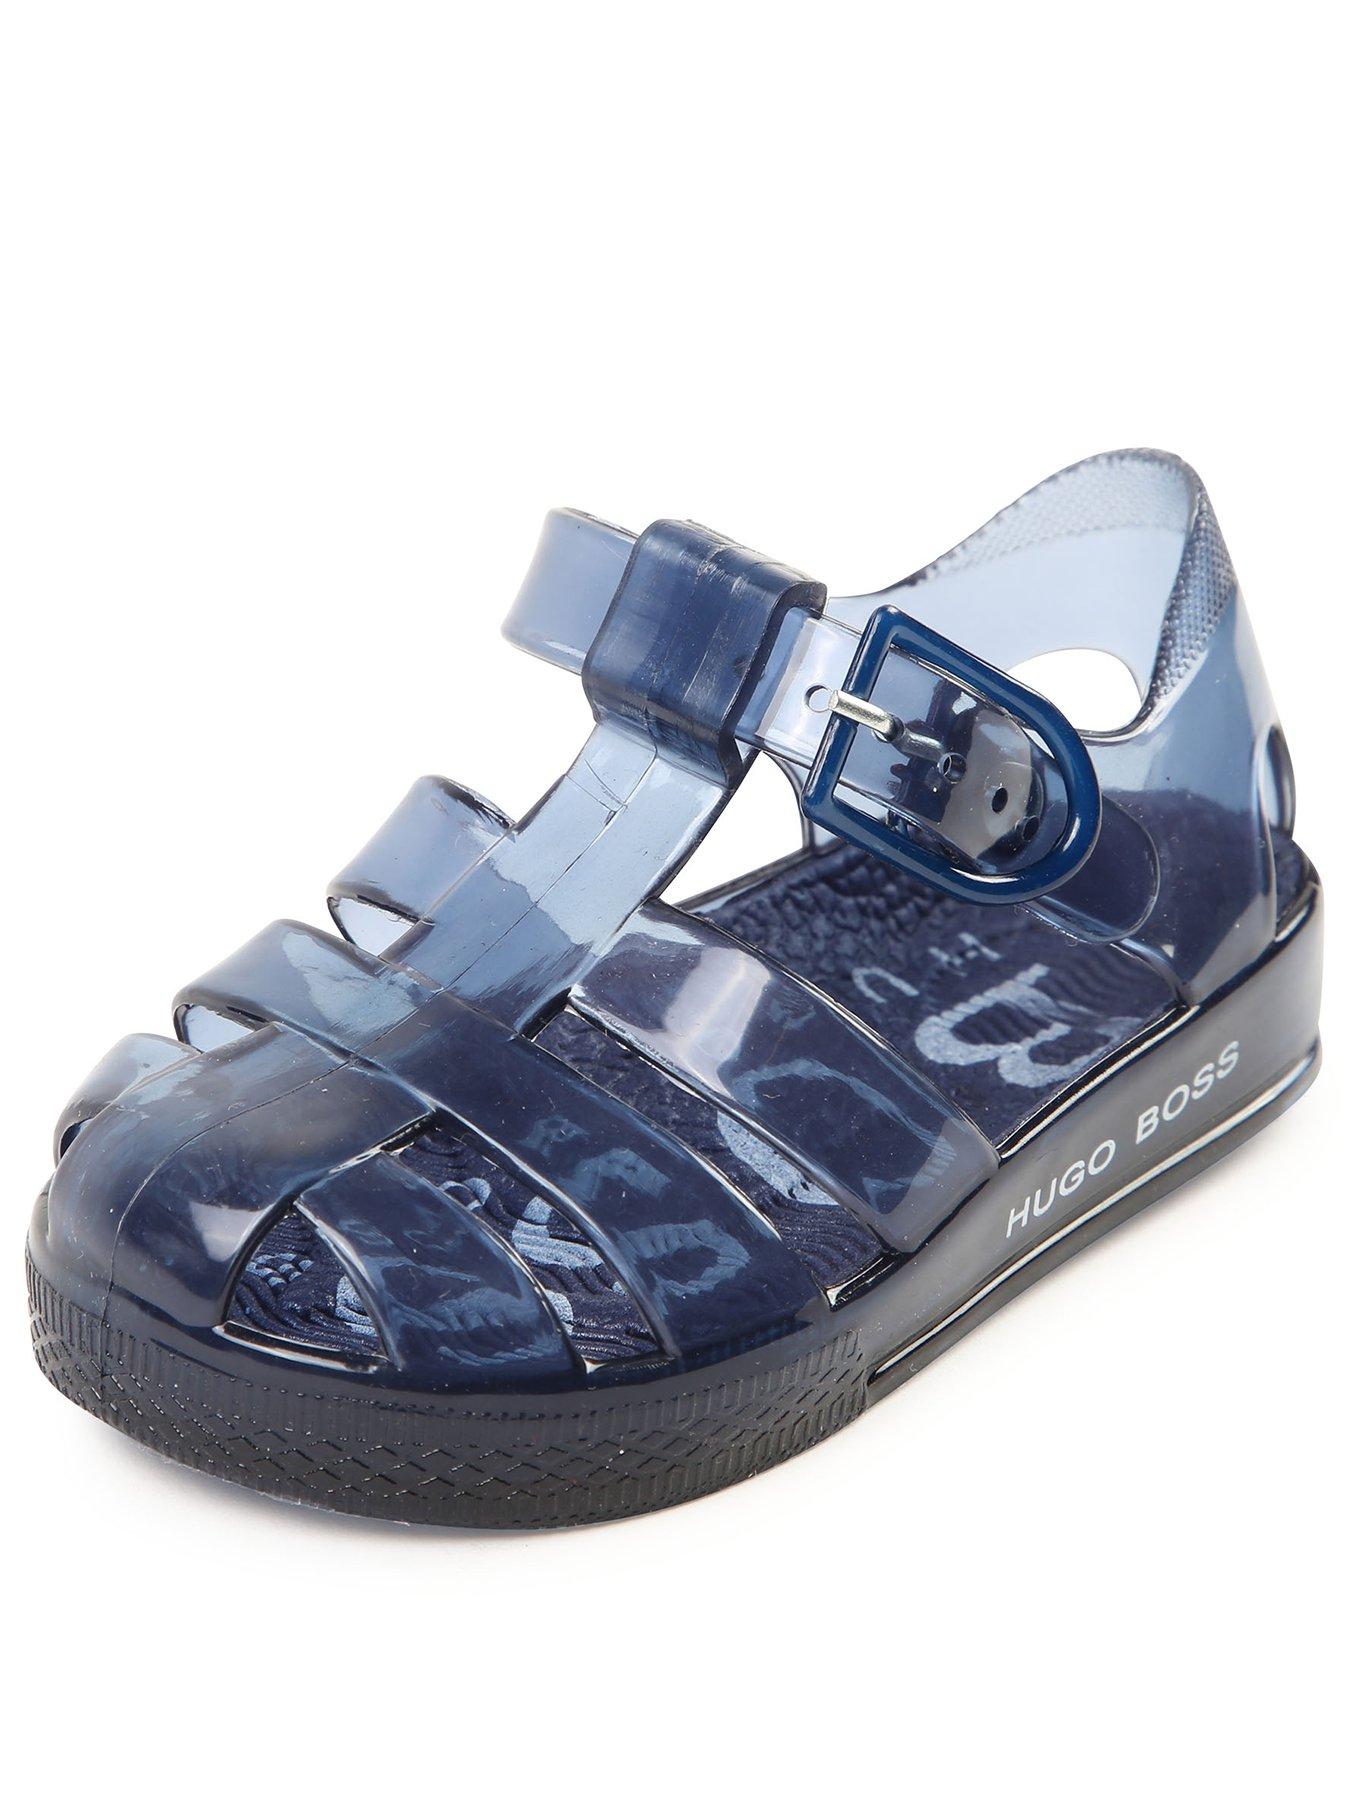 Hugo Boss J09111 76N Baby's Jelly Shoes Blue Summer Sandals 